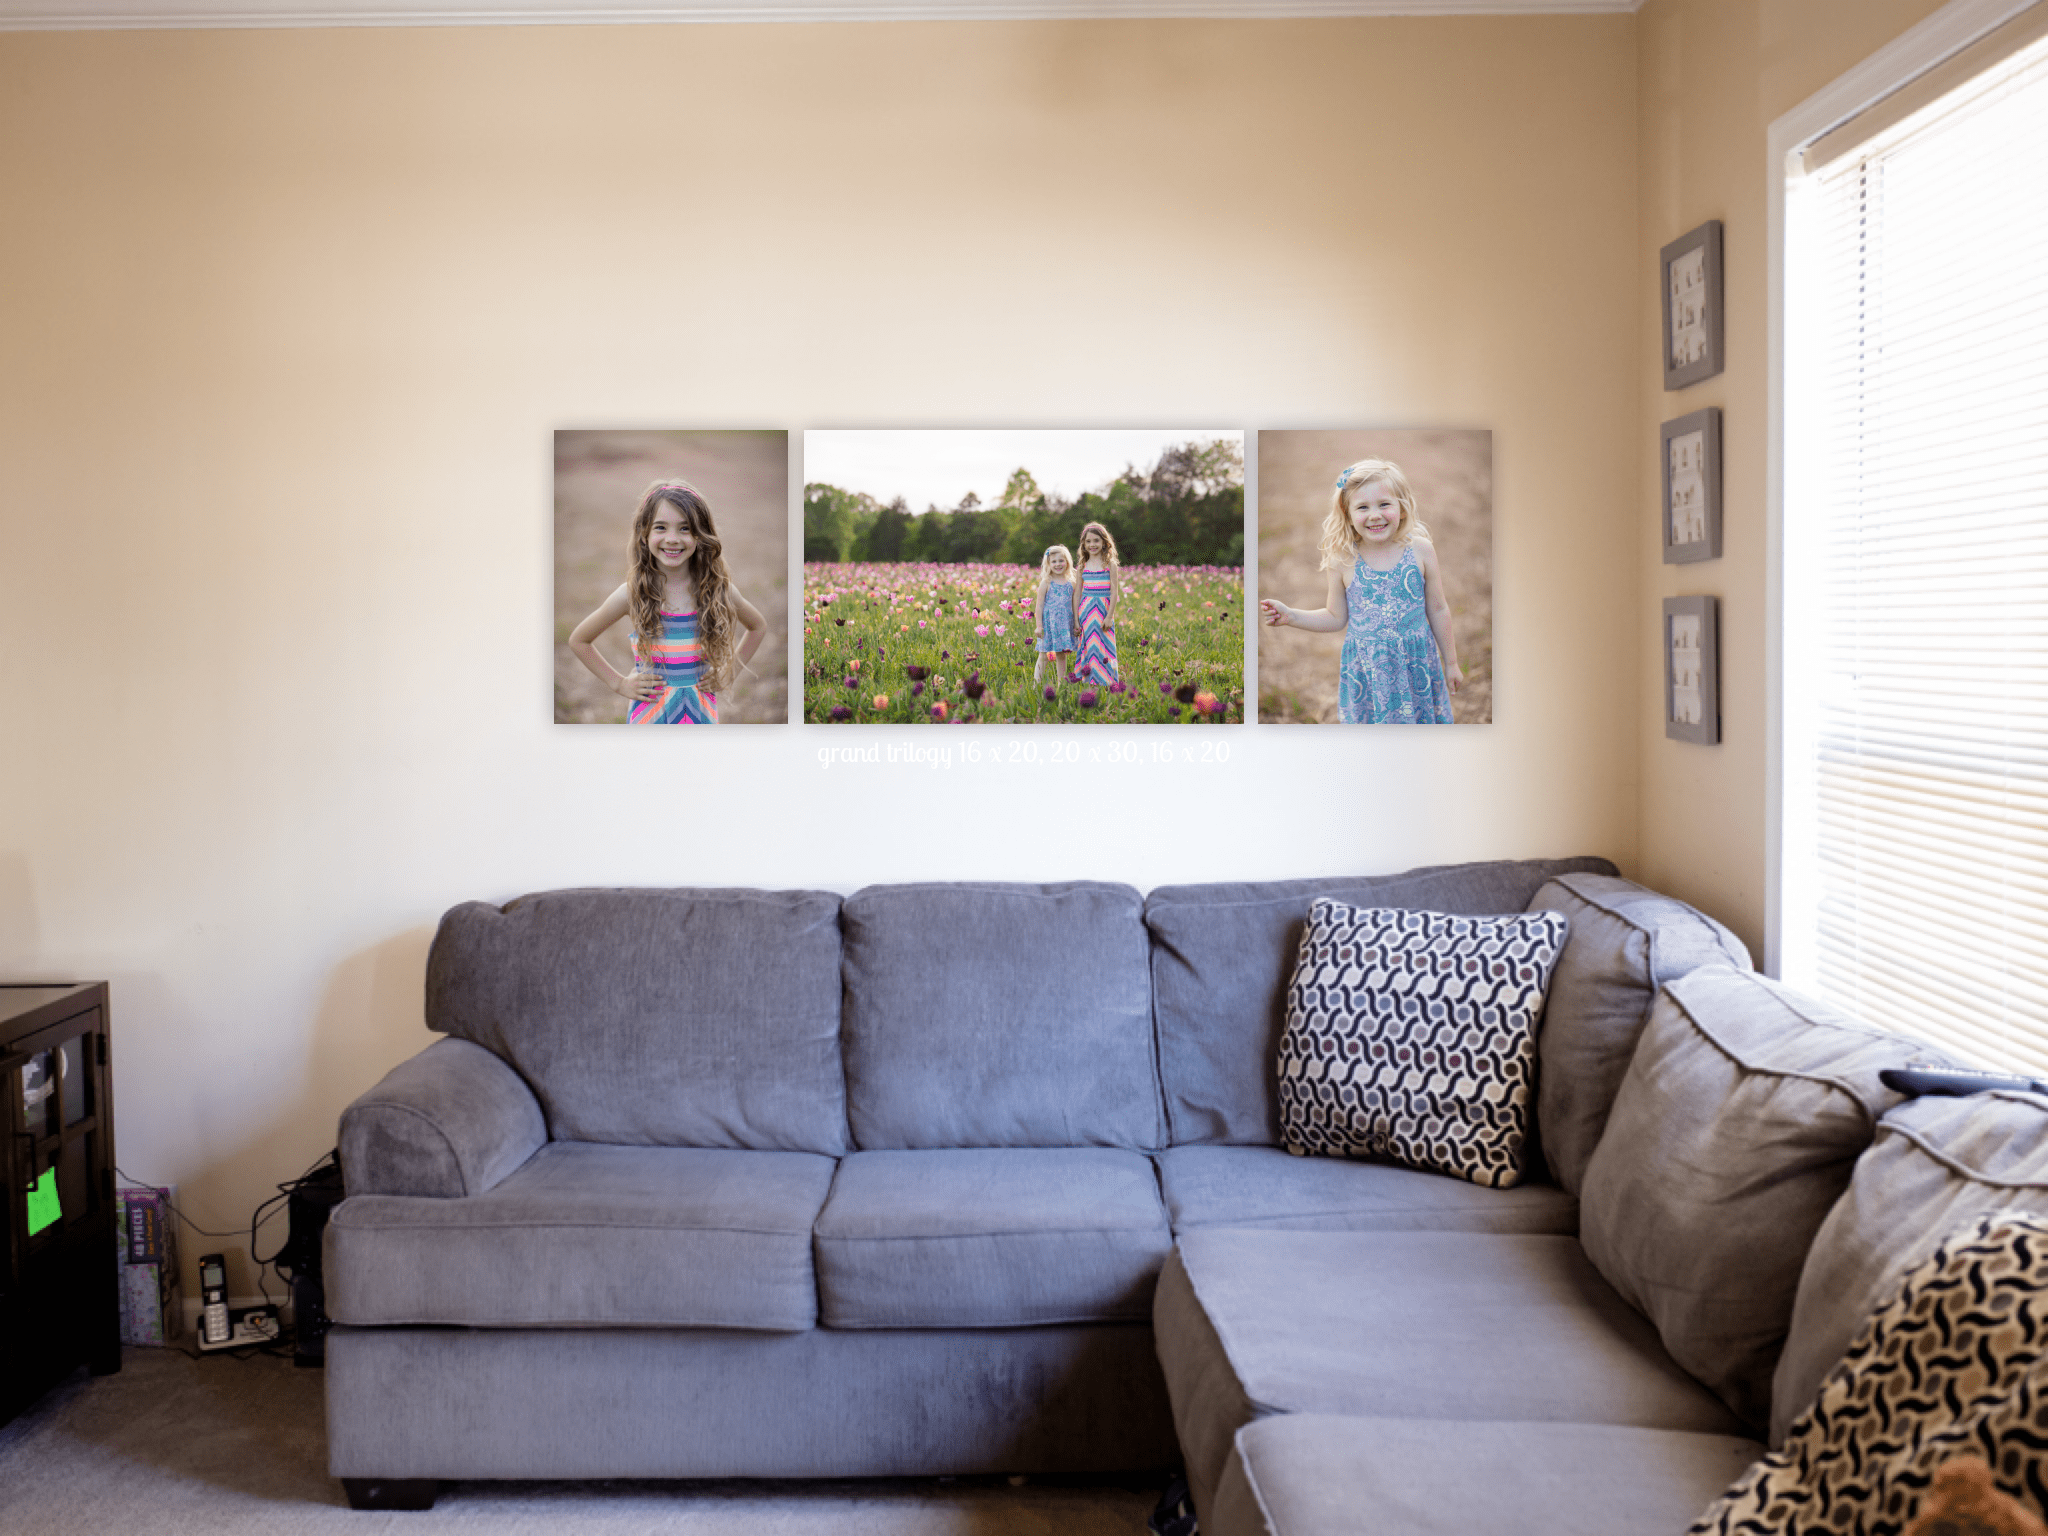 Have you ever had gorgeous pictures taken, and then thought...now what? Introducing wall design consultations in Northern Virginia.